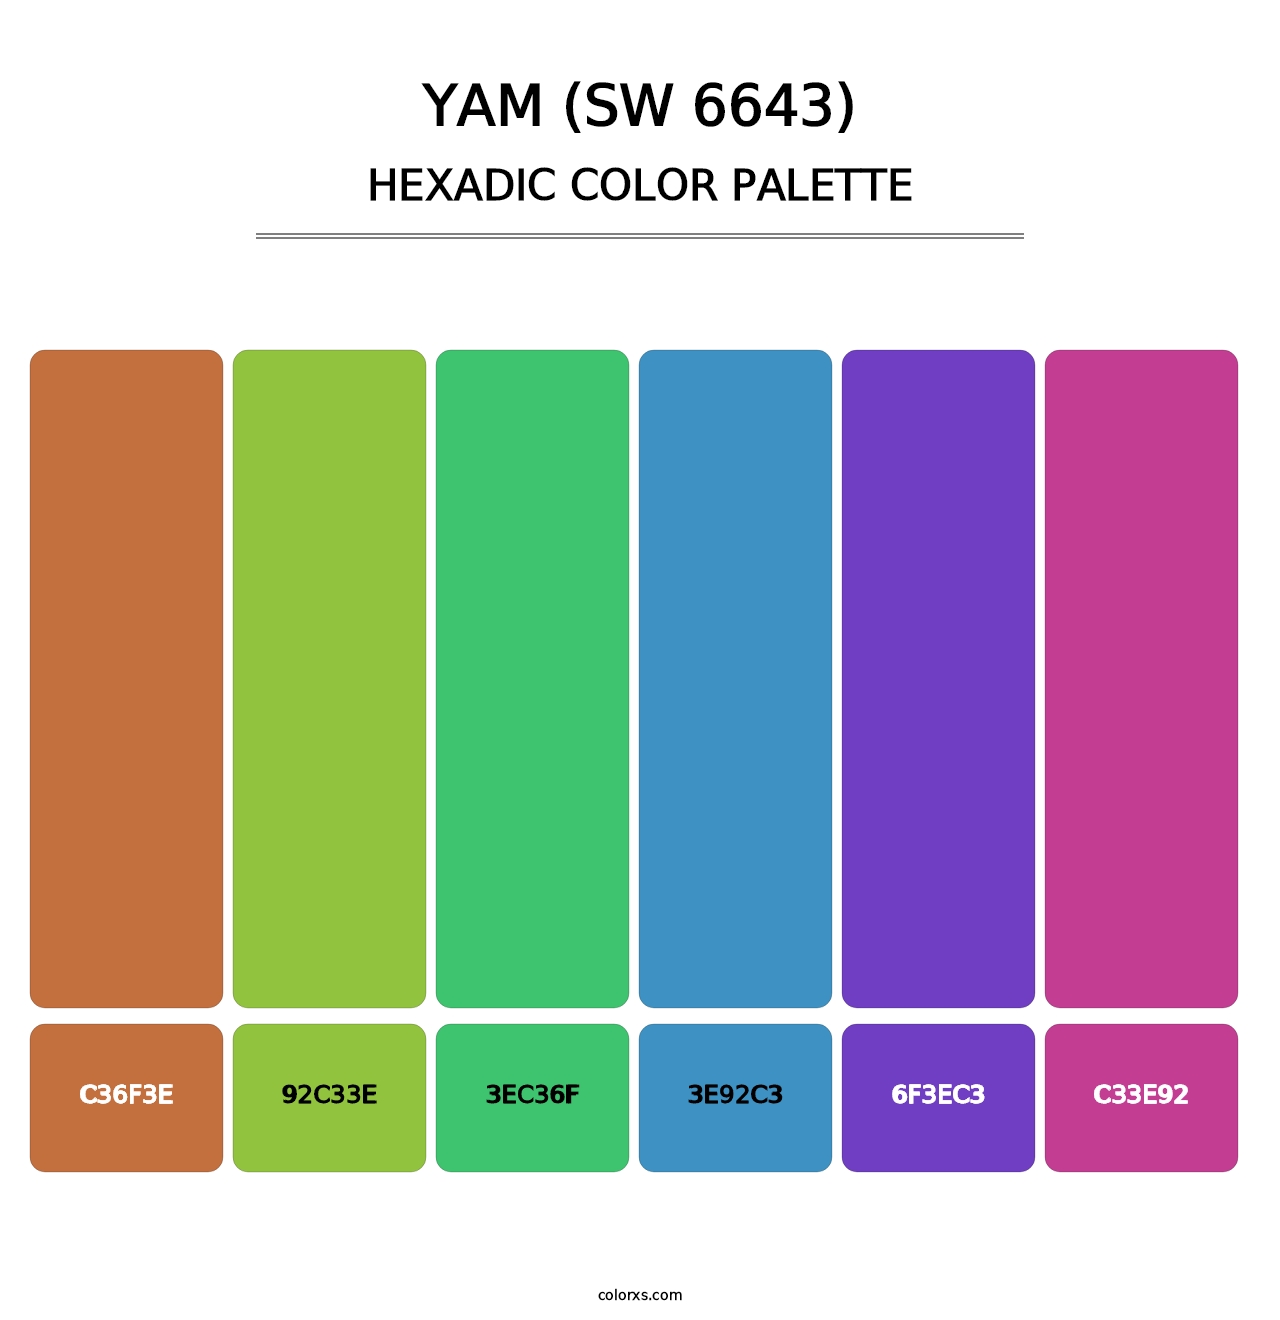 Yam (SW 6643) - Hexadic Color Palette